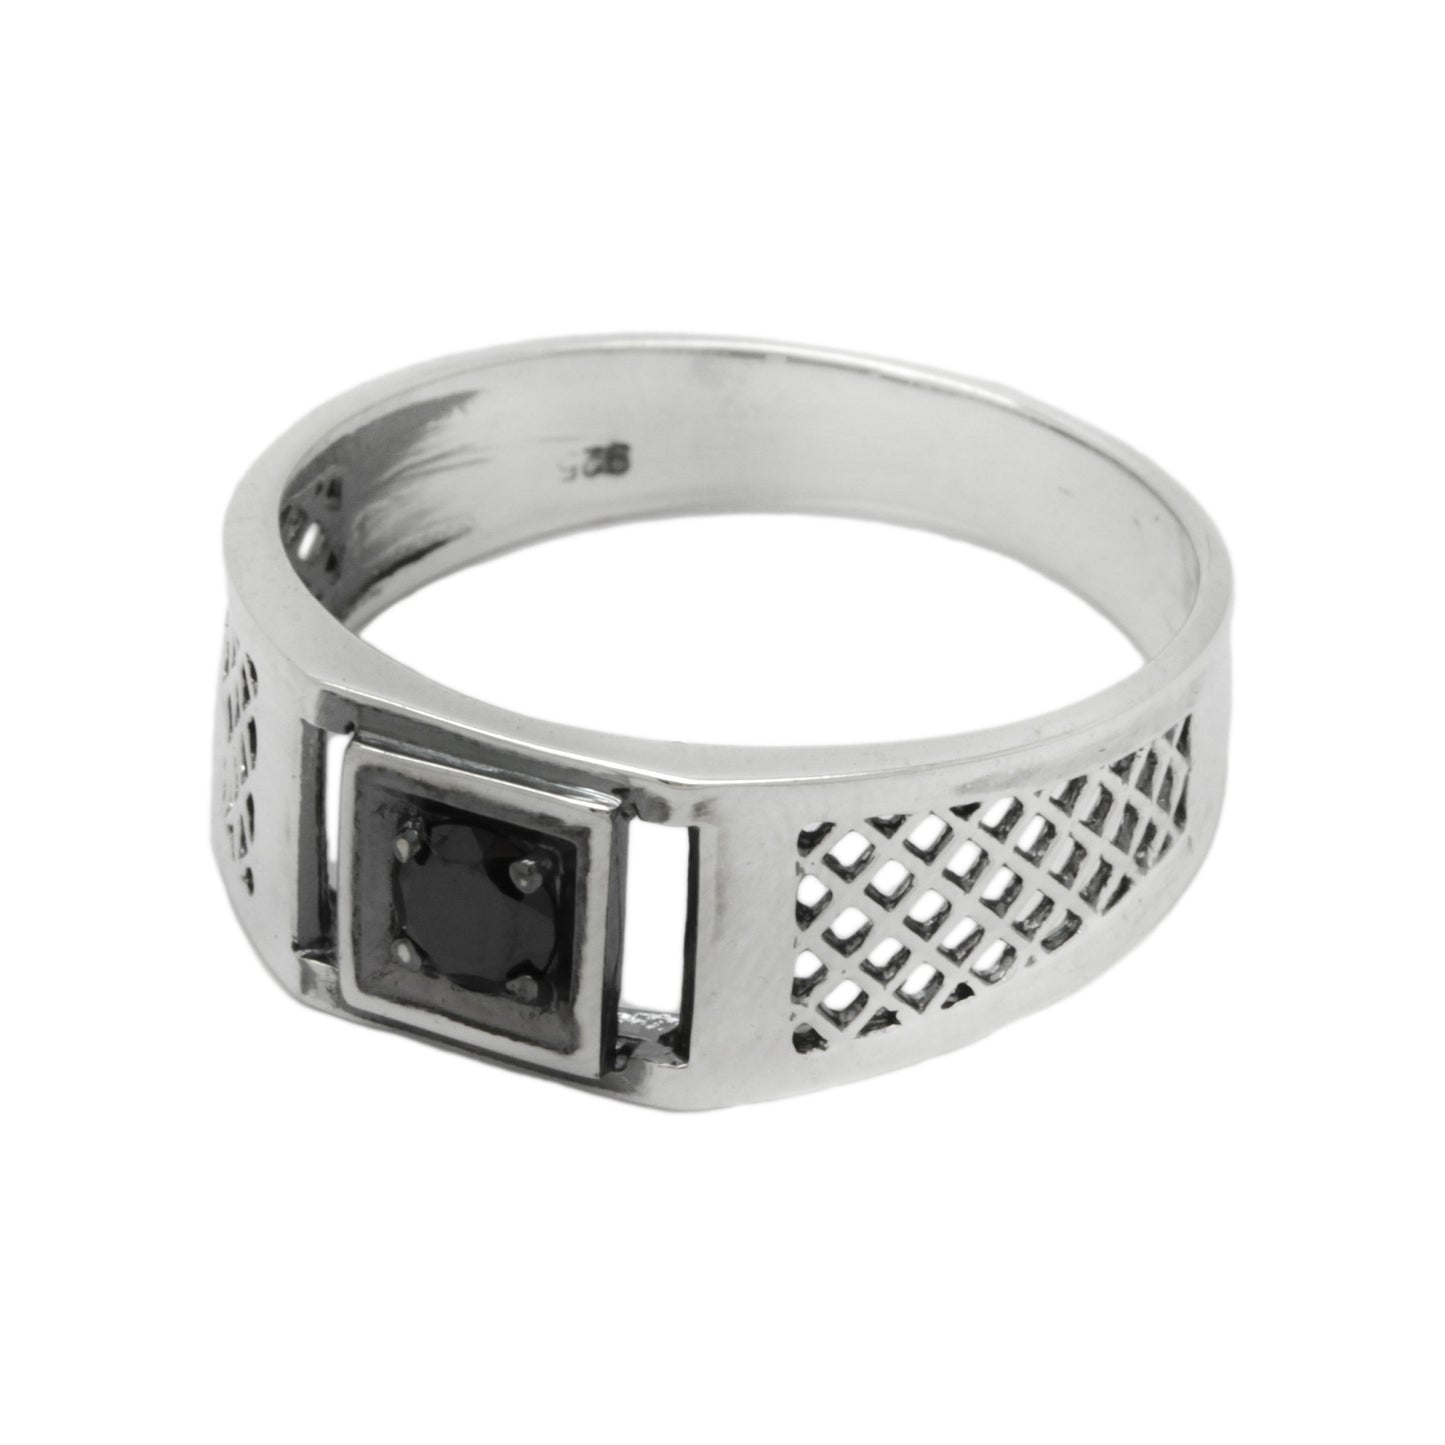 Light Men Ring Silver 925 with Round Black Zircon, Pinky Ring